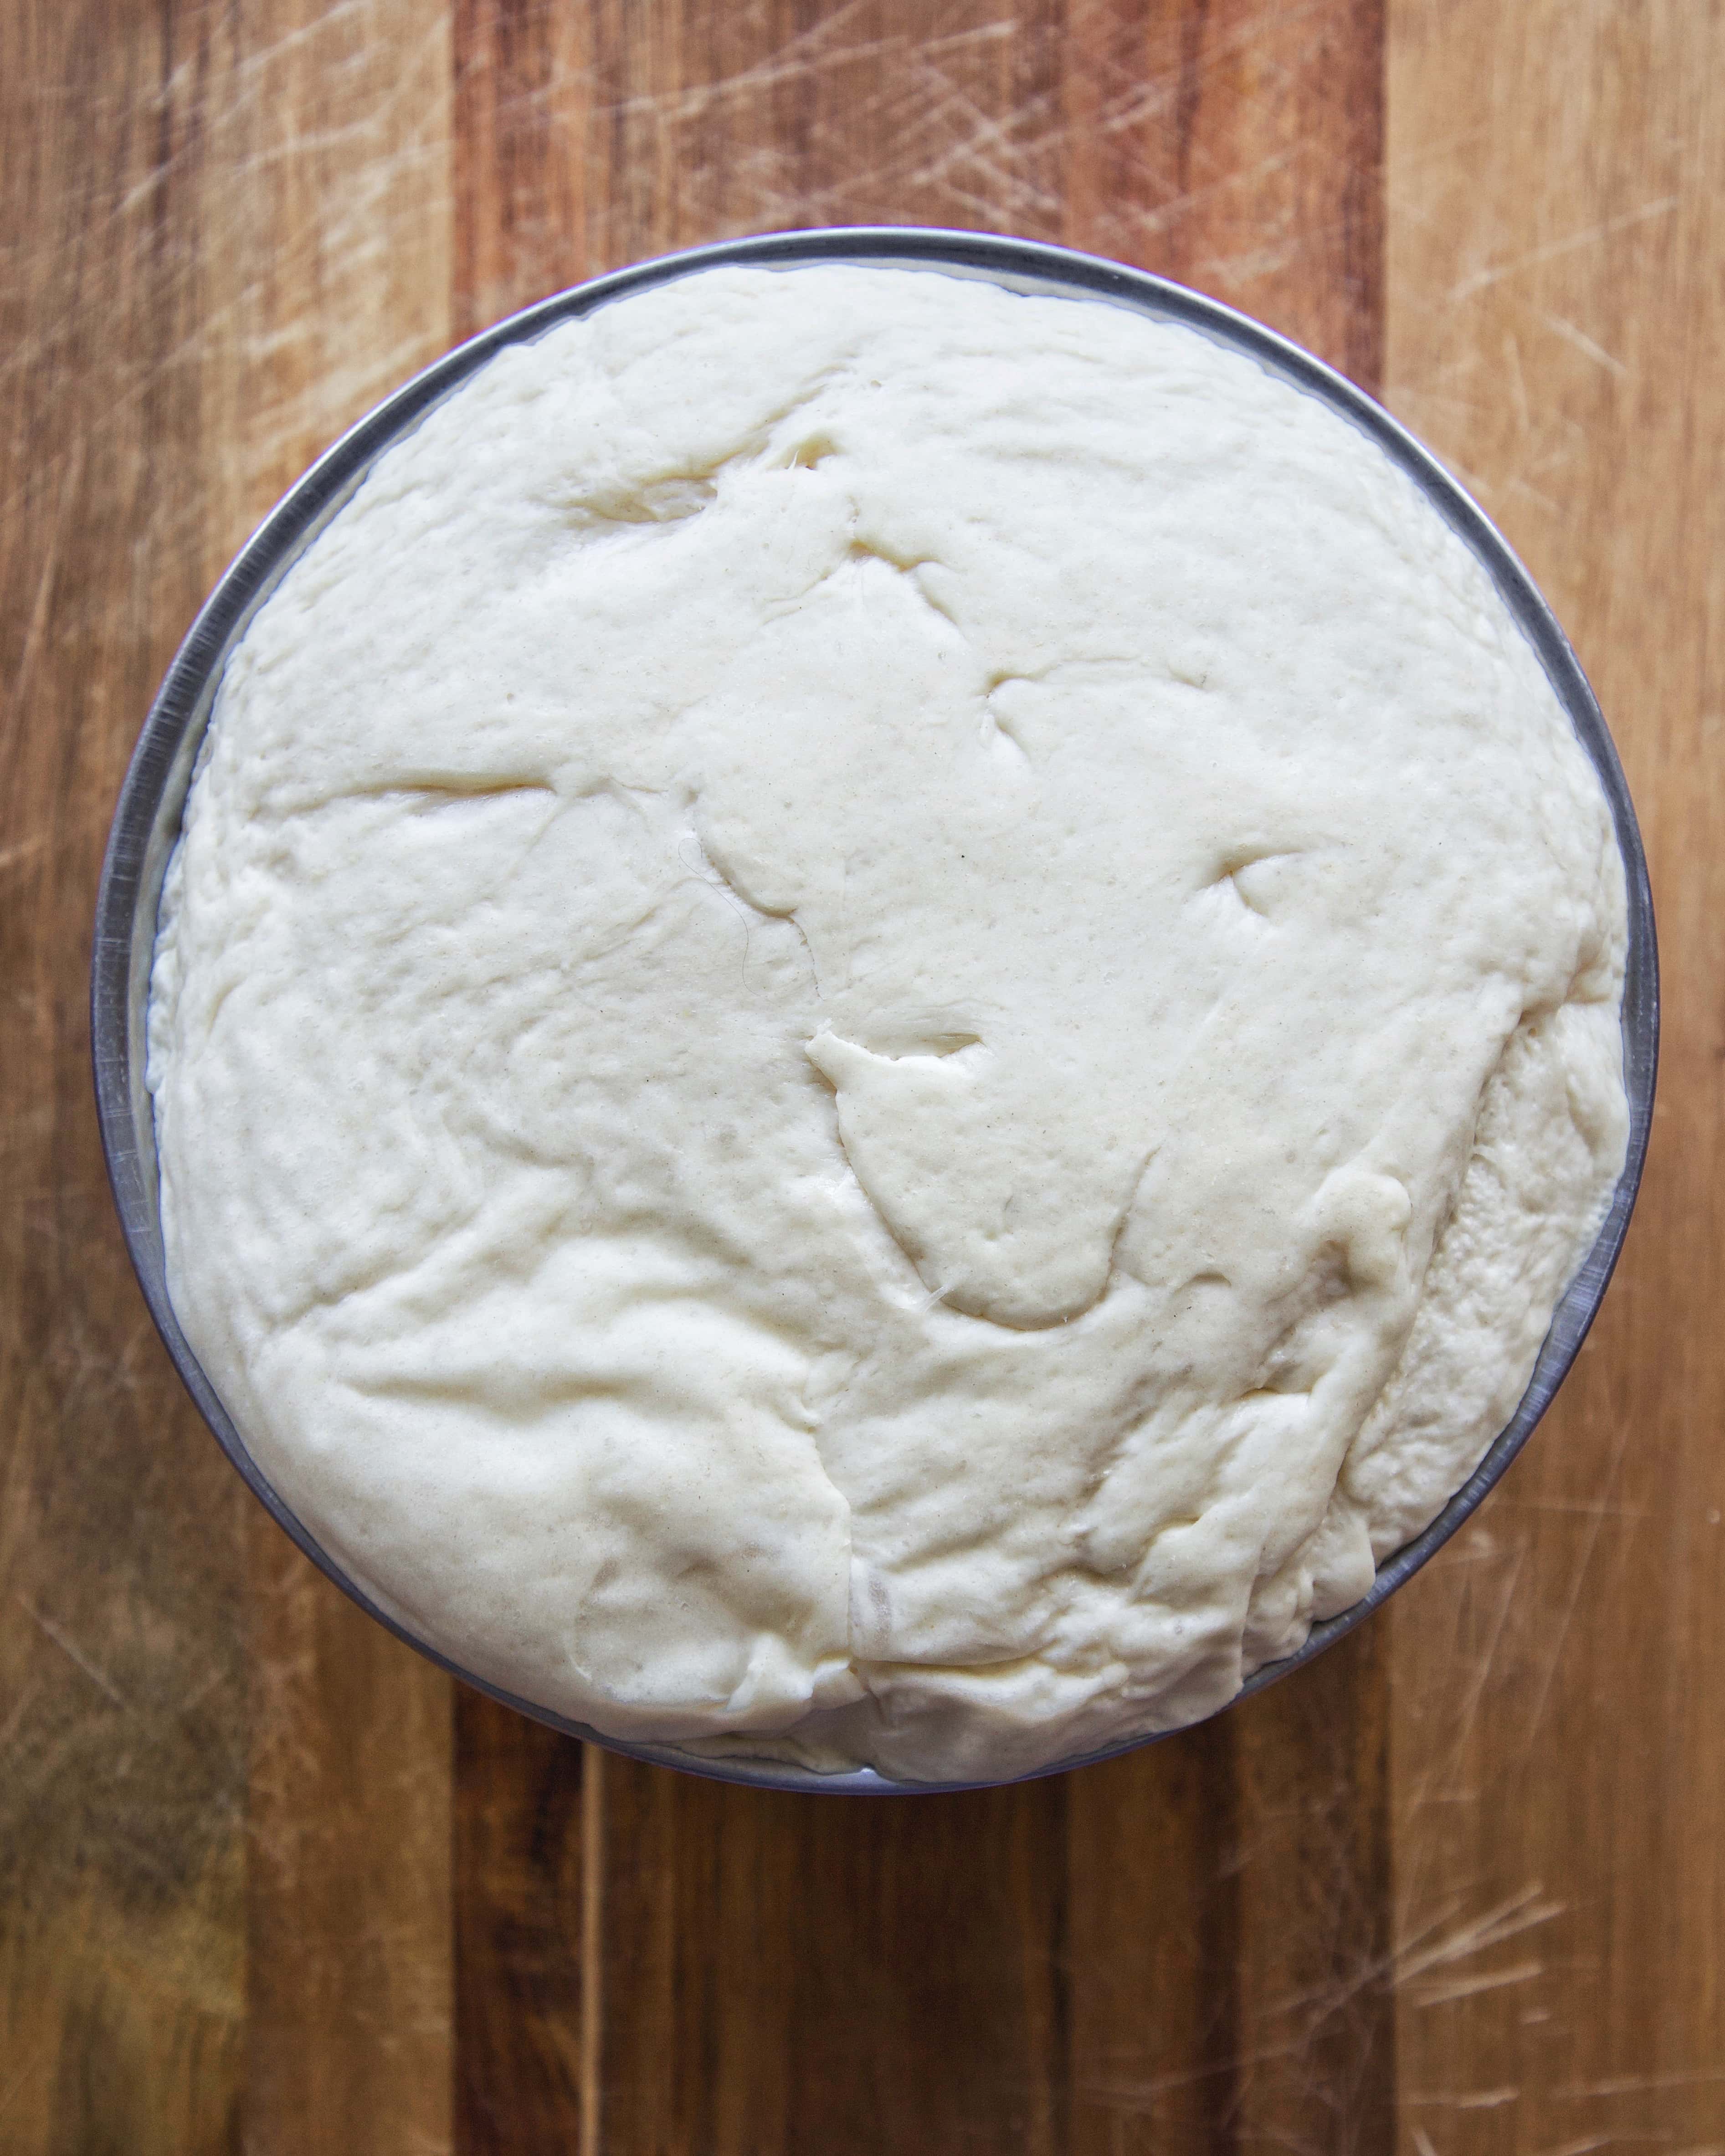 image of pretzel dough after proofing, doubled in size